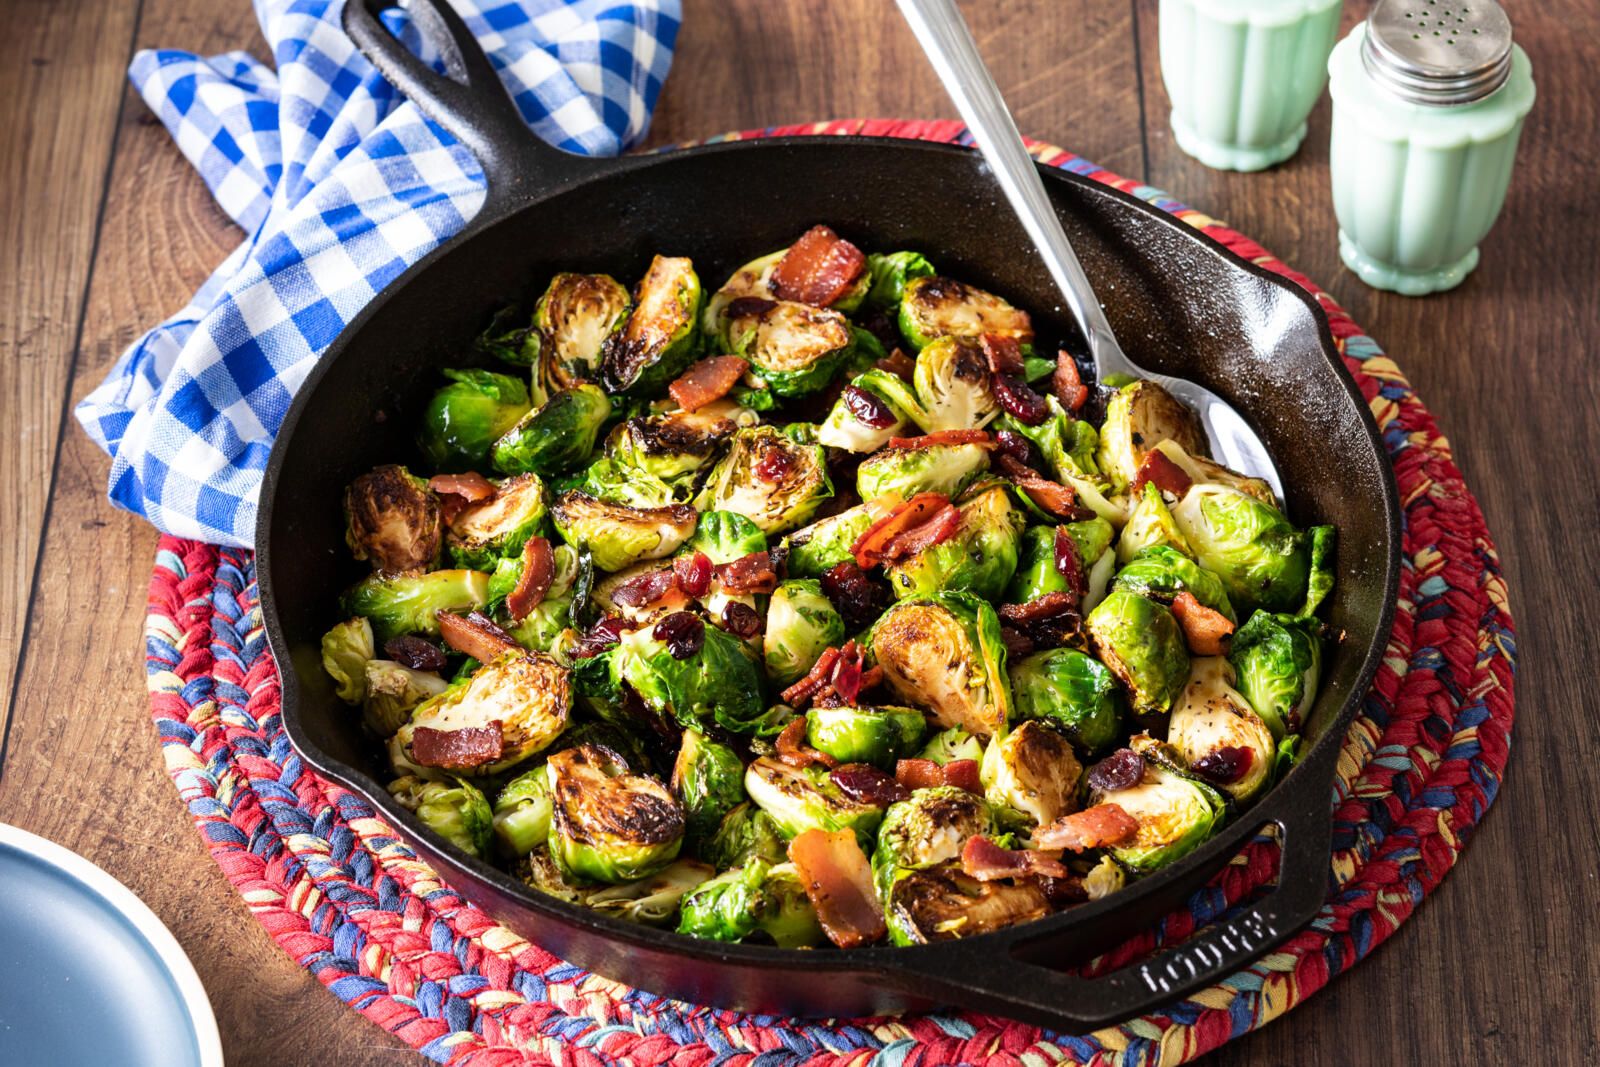 Skillet-Braised Brussels Sprouts Recipe